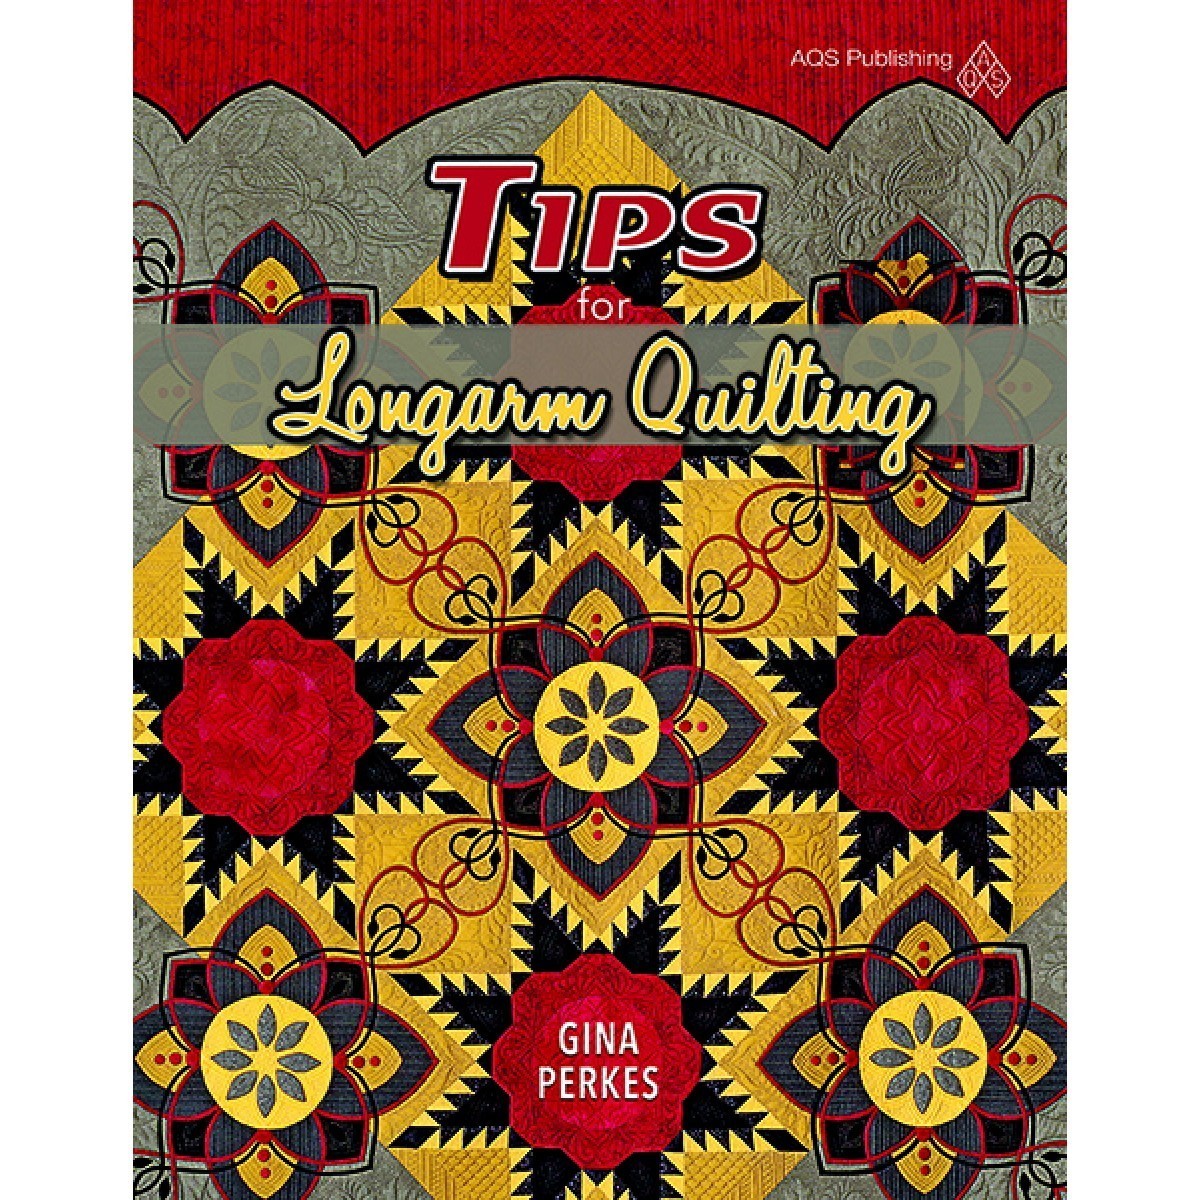 Tips for Longarm Quilting by Gina Perkes (signed by the author)